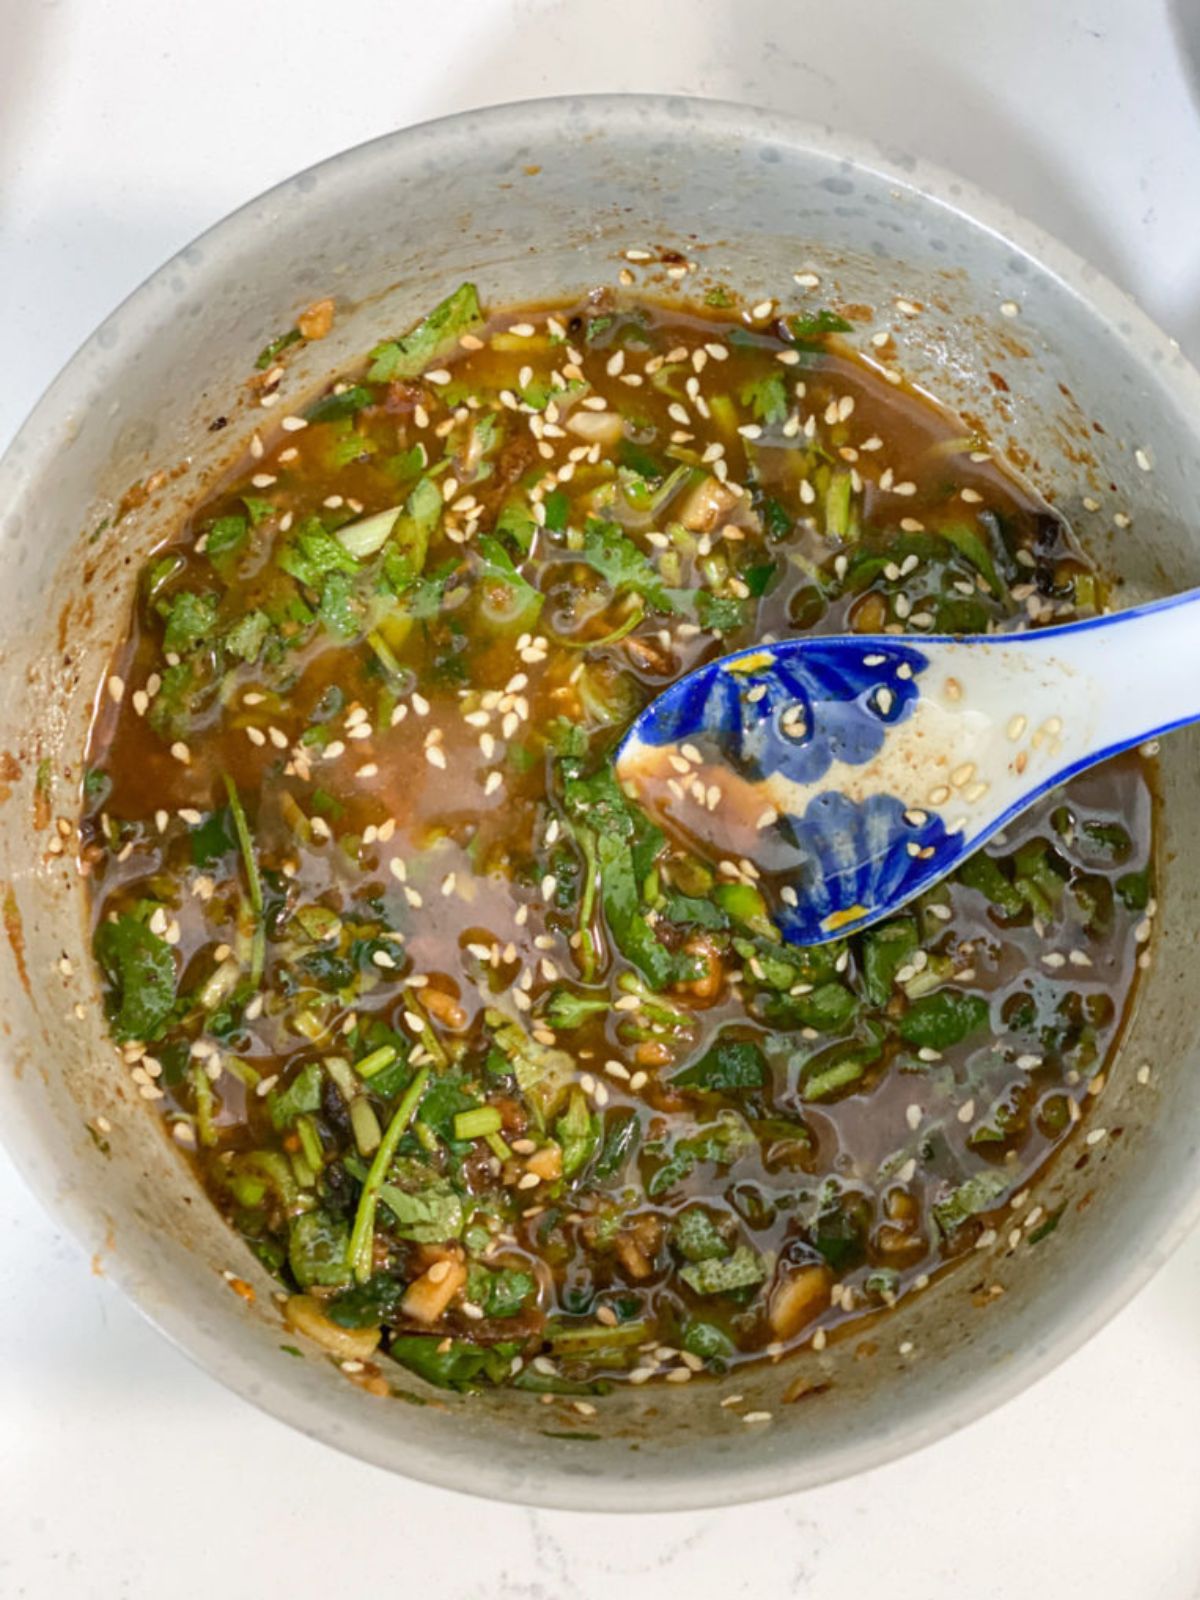 Dipping sauce with cilantro, sesame seeds, and garlic.